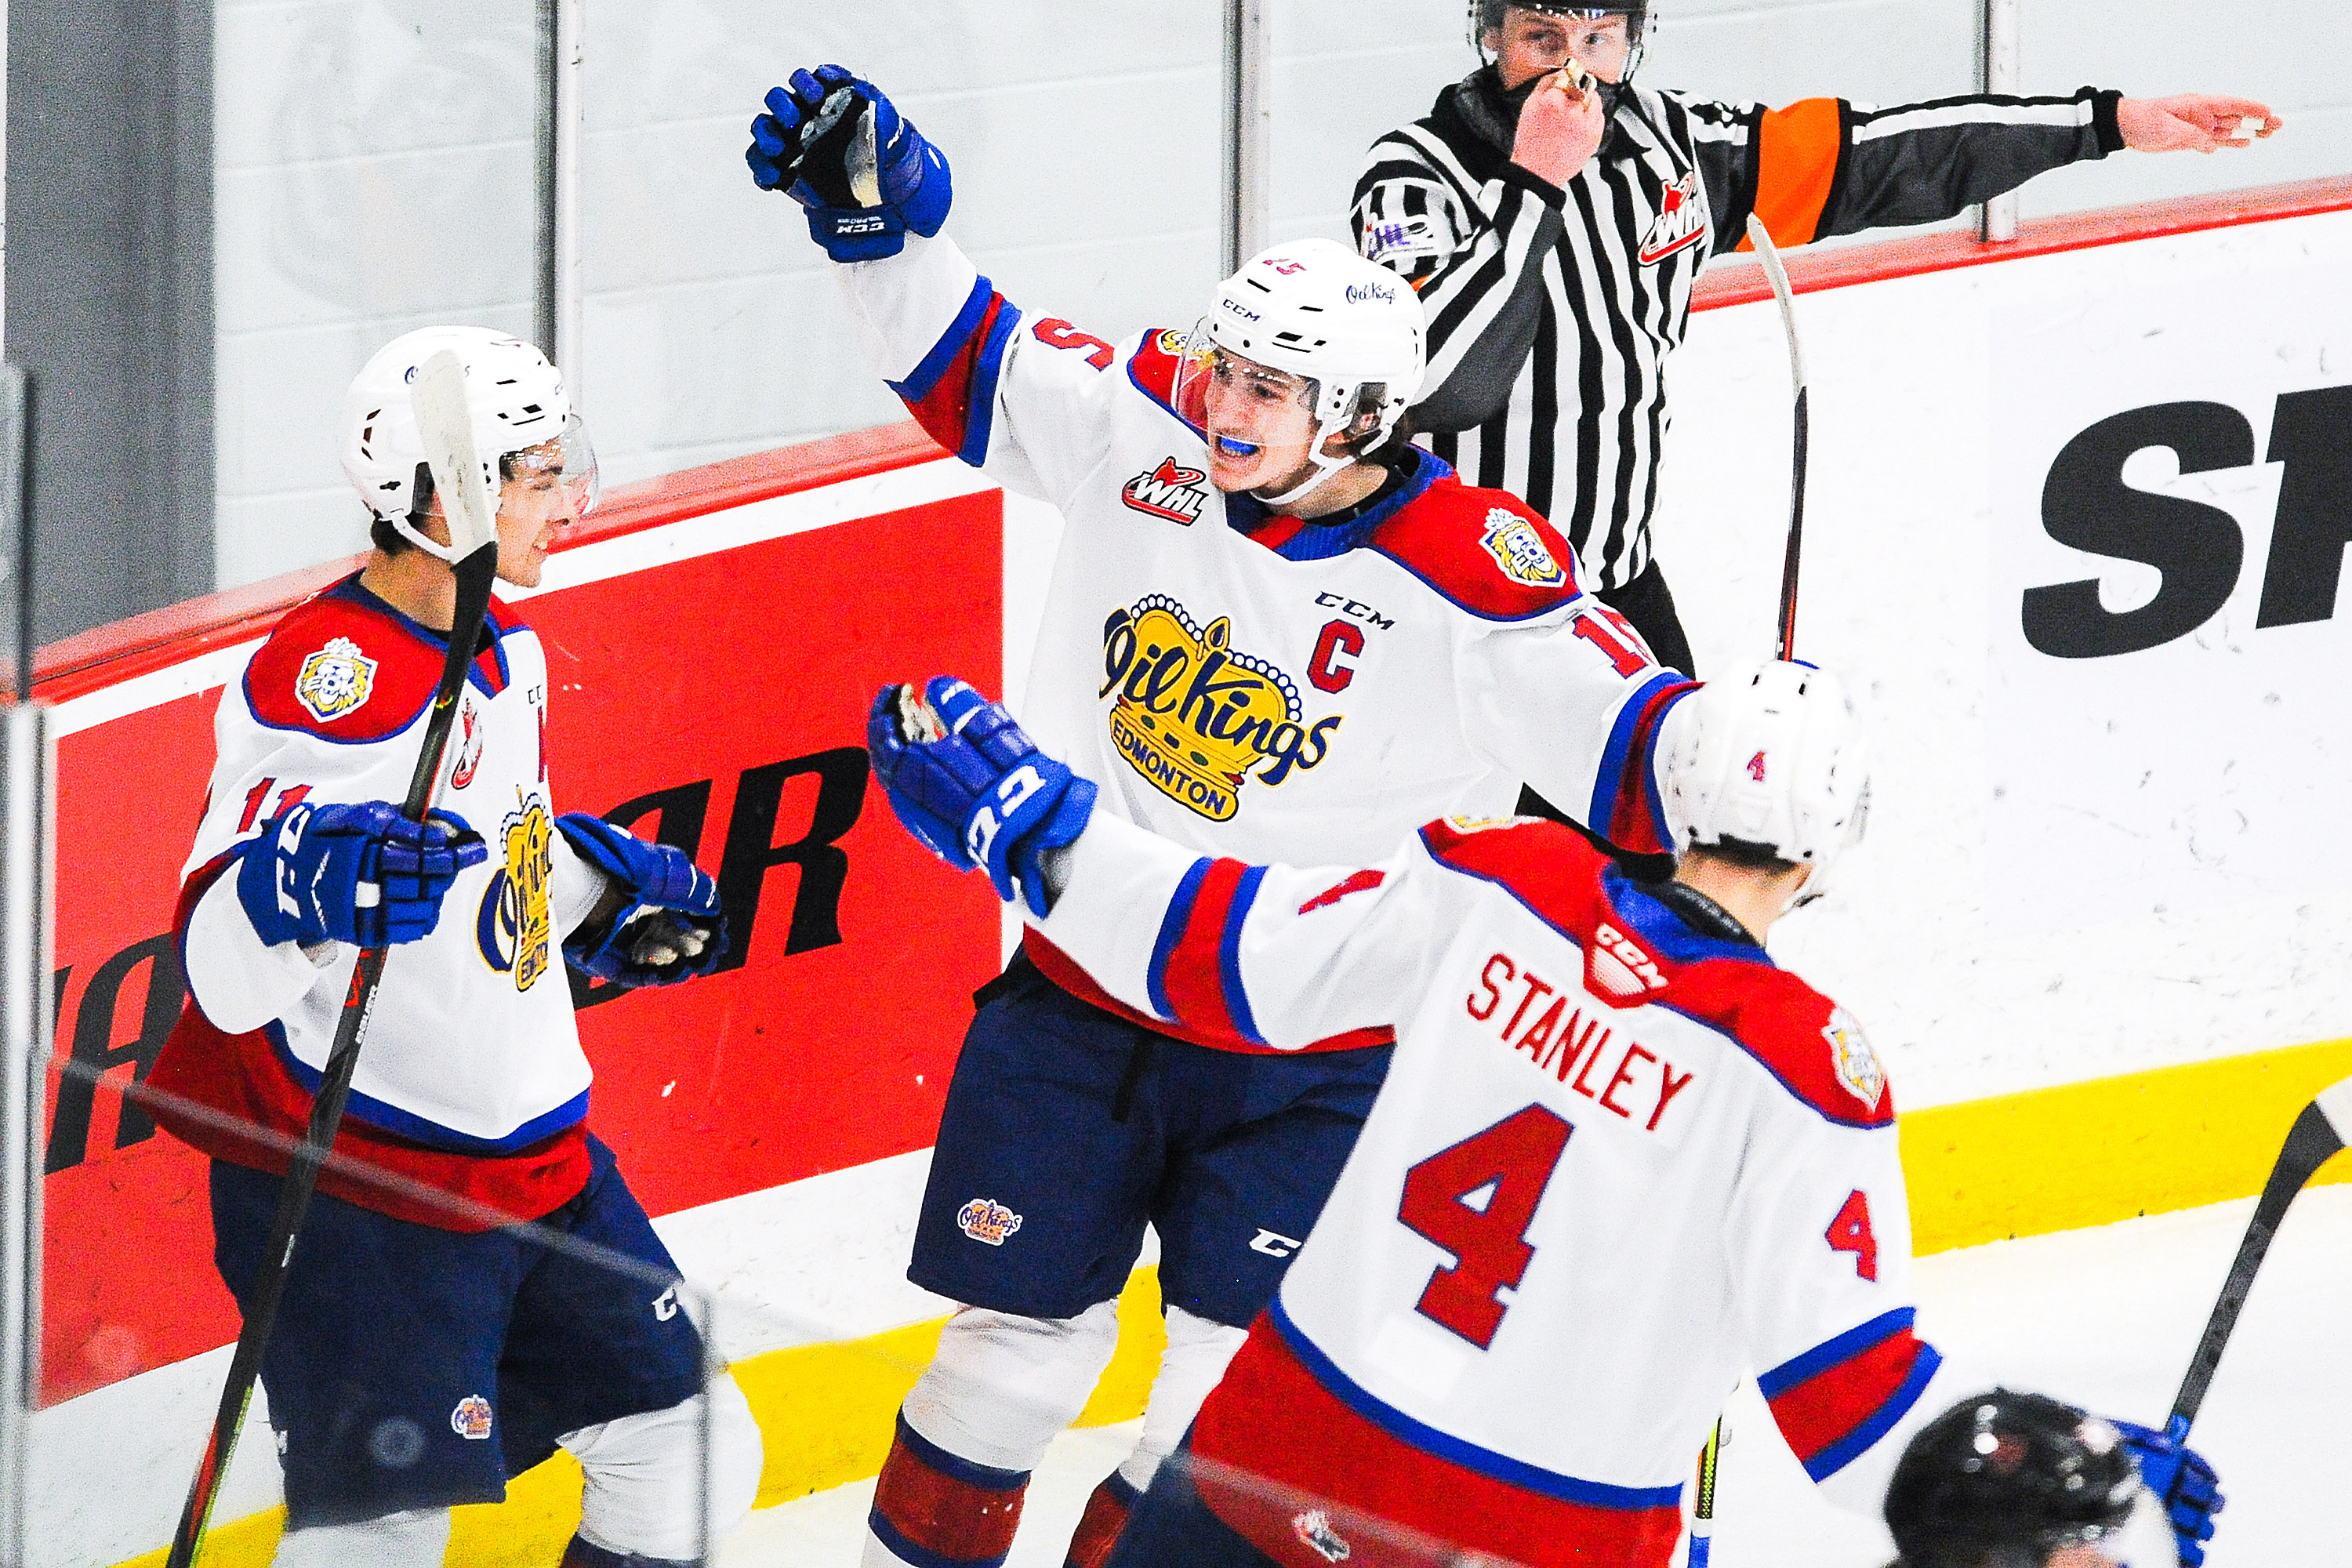 Dylan Guenther #11 (L) of the Edmonton Oil Kings celebrates with his teammates Scott Atkinson #15 (C) and Ross Stanley #4 (R) after scoring against the Calgary Hitmen during a WHL game at Seven Chiefs Sportsplex on March 27, 2021 in Calgary, Alberta, Canada.